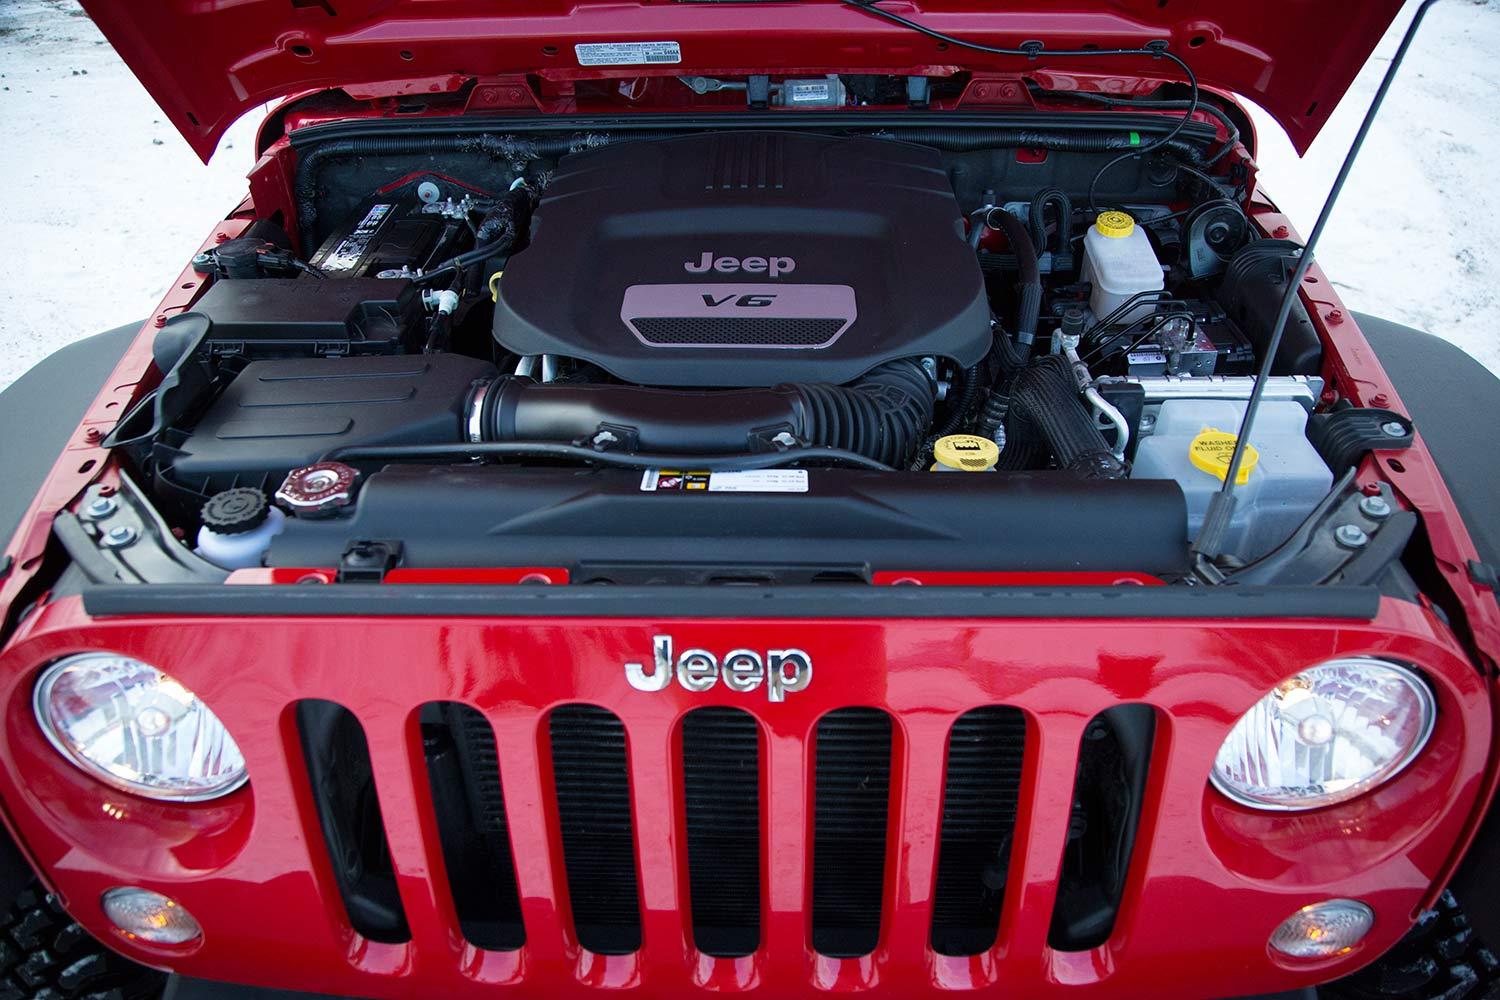 2015 Jeep Wrangler Unlimited review | Digital Trends